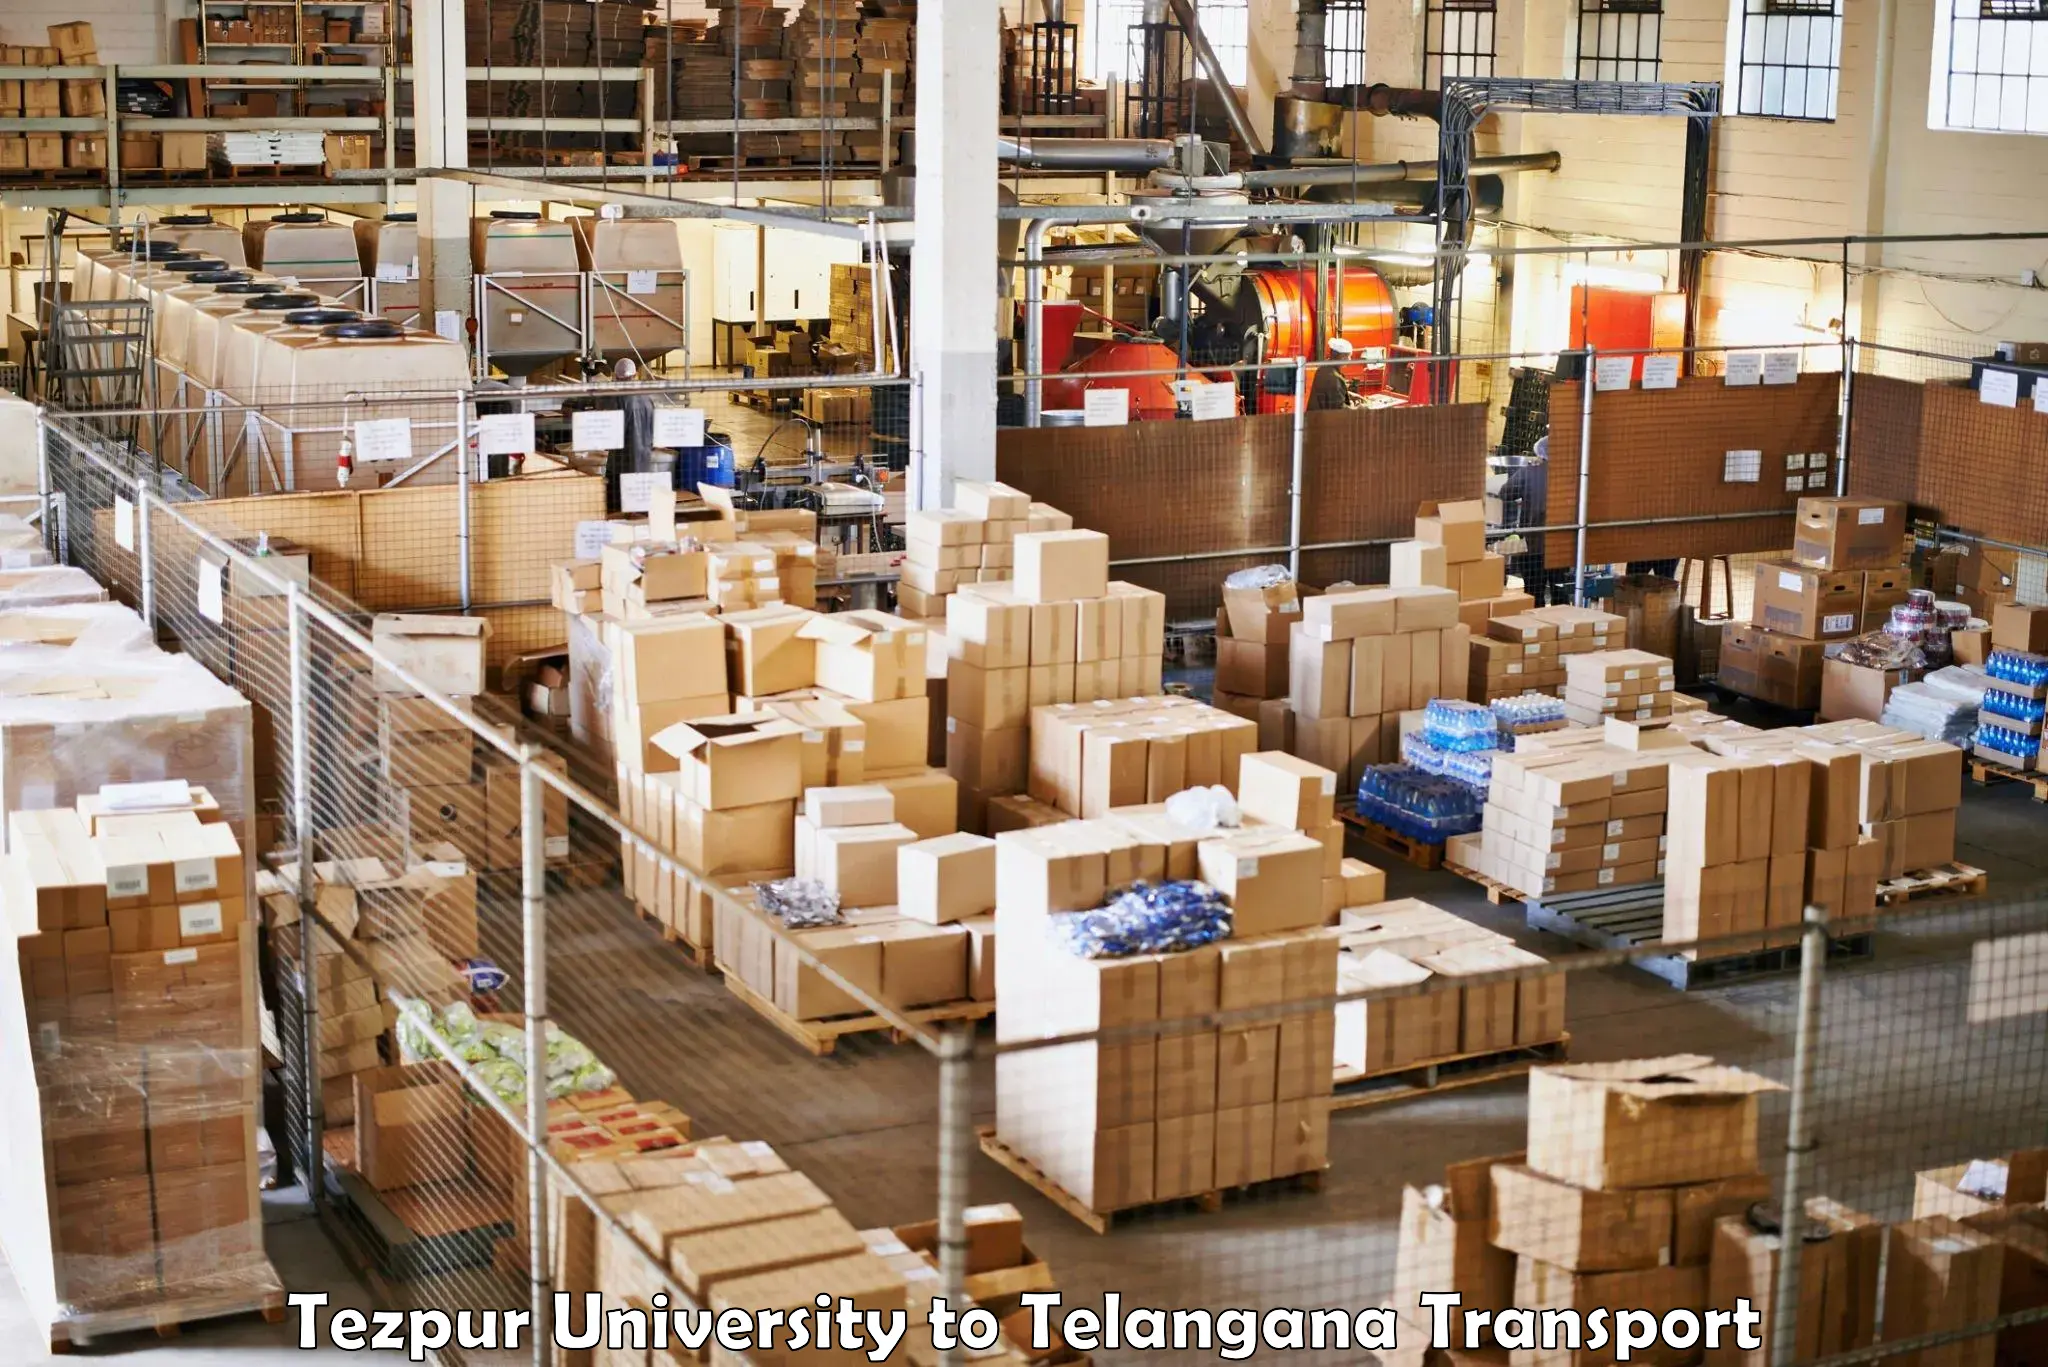 Daily parcel service transport Tezpur University to Alair